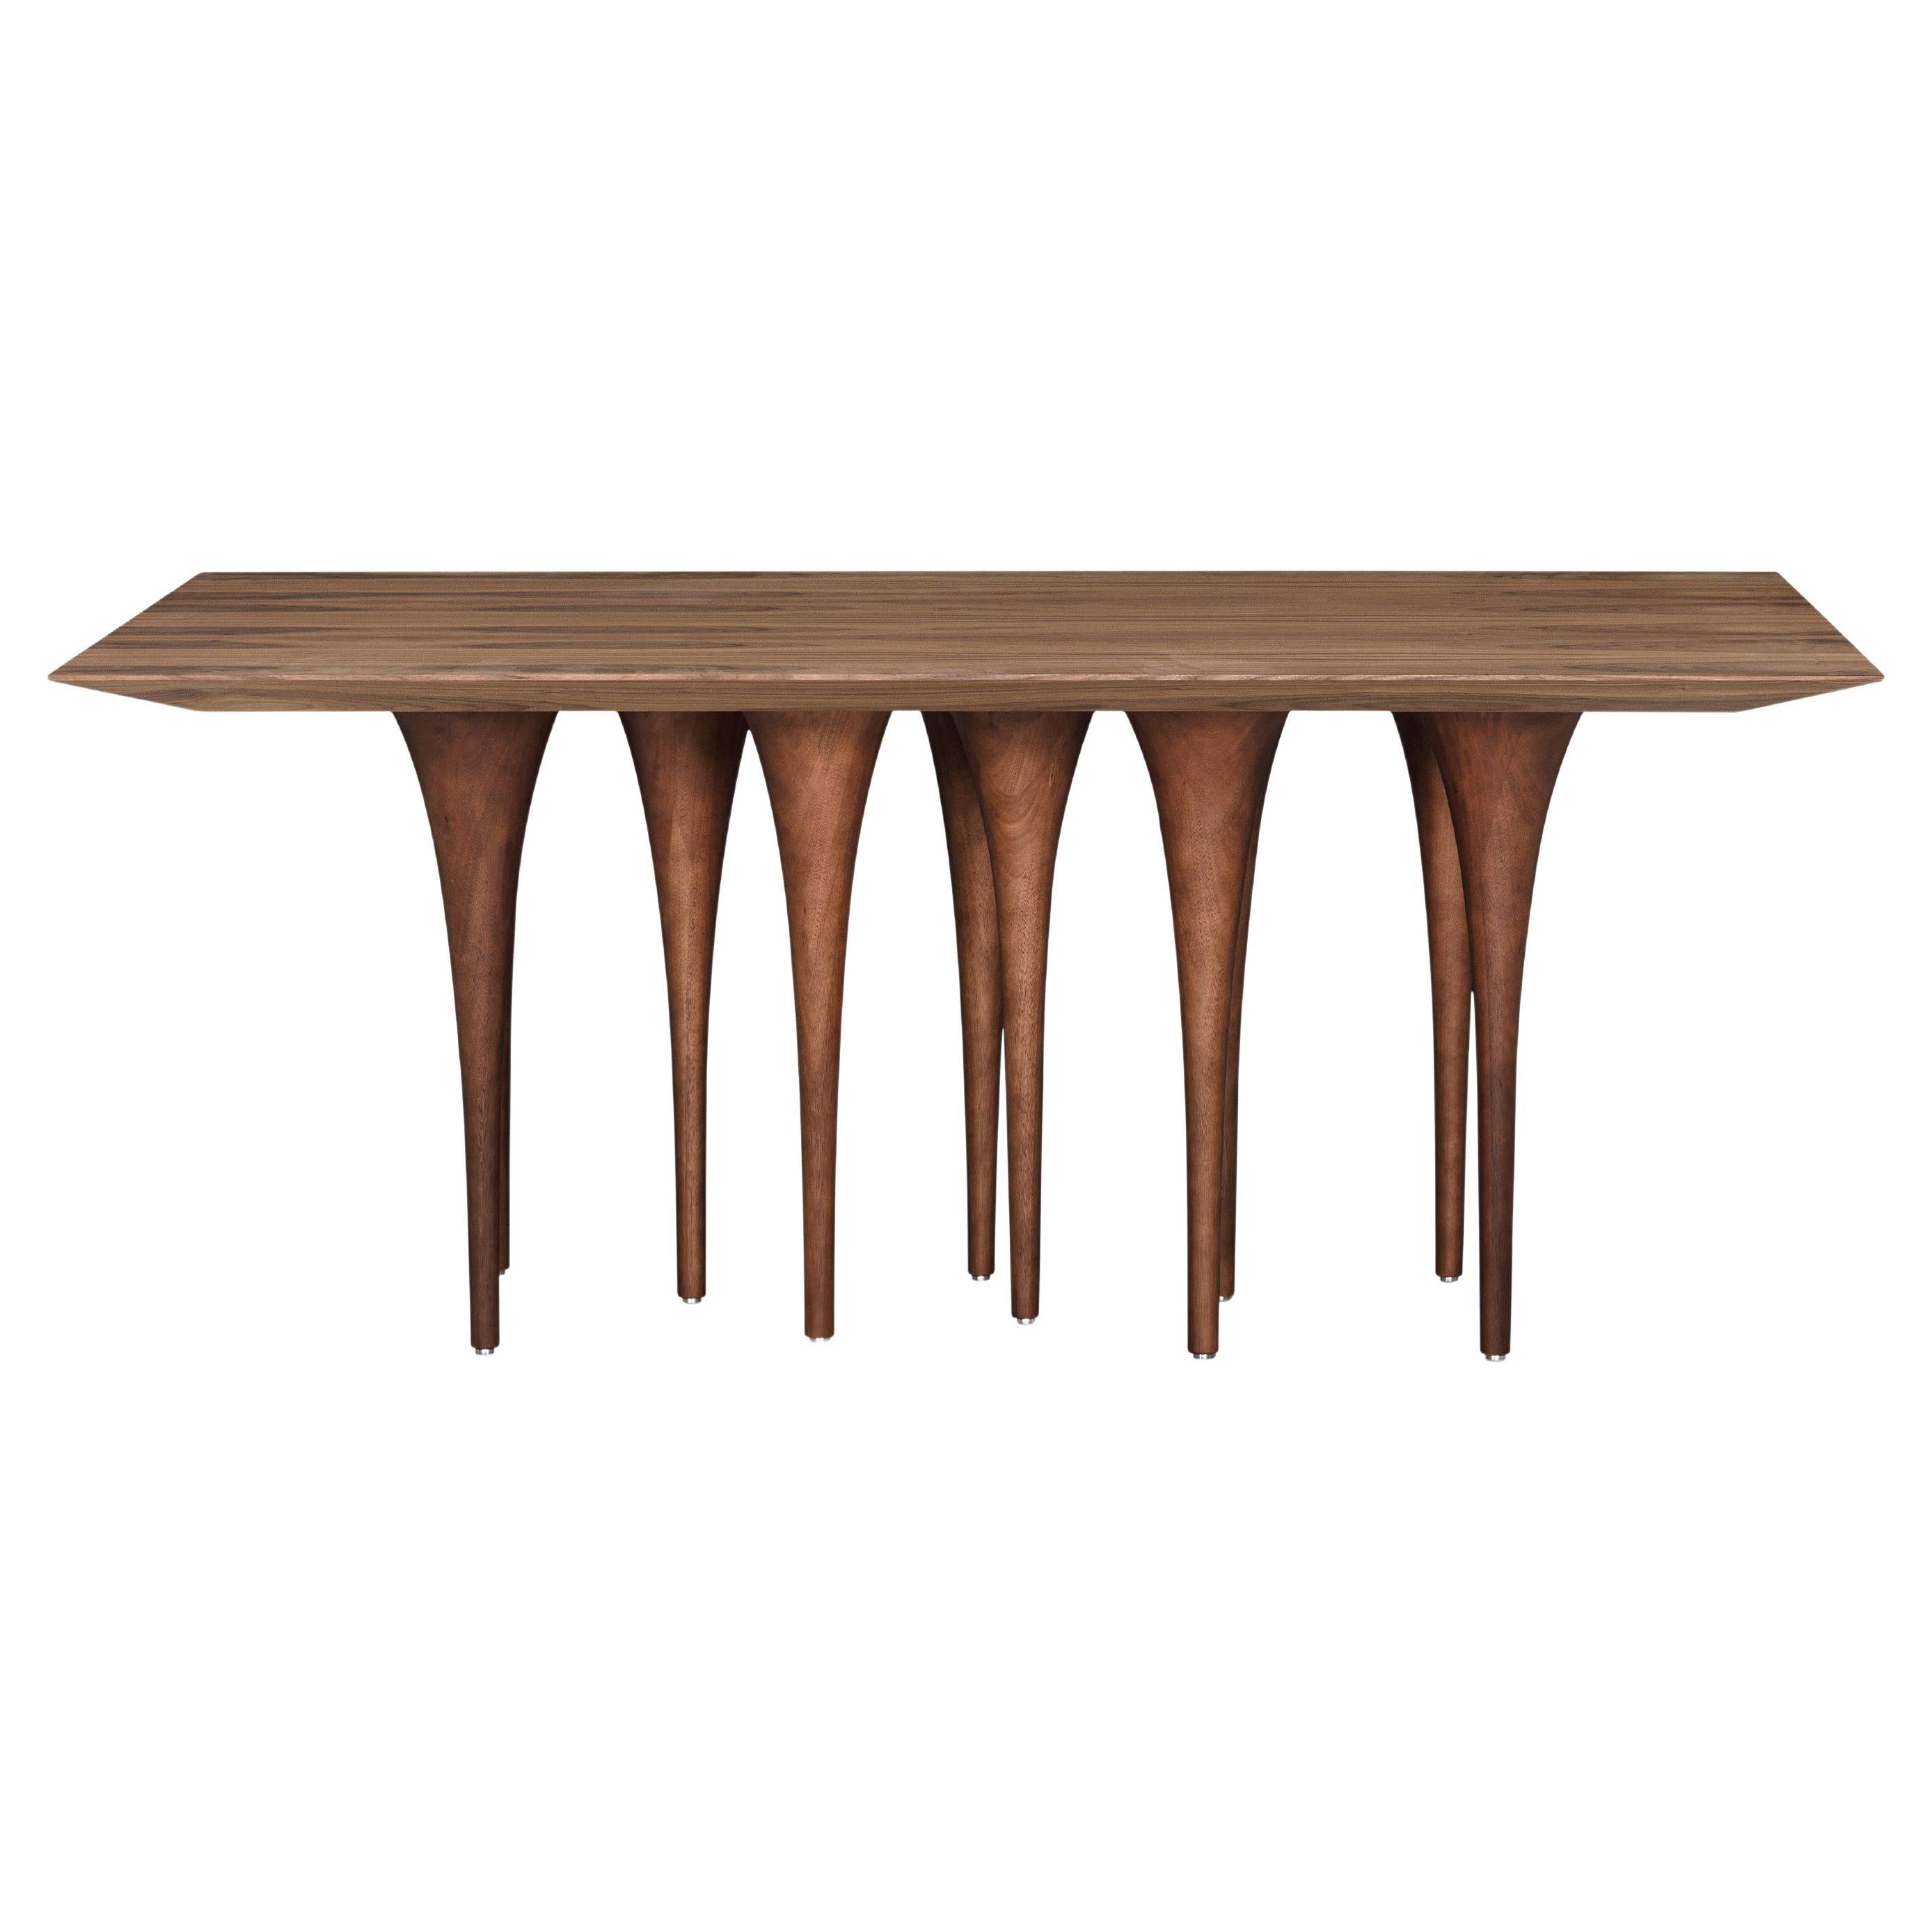 Pin Dining Table with a Walnut Wood Veneered Table Top and 10 Legs 71''